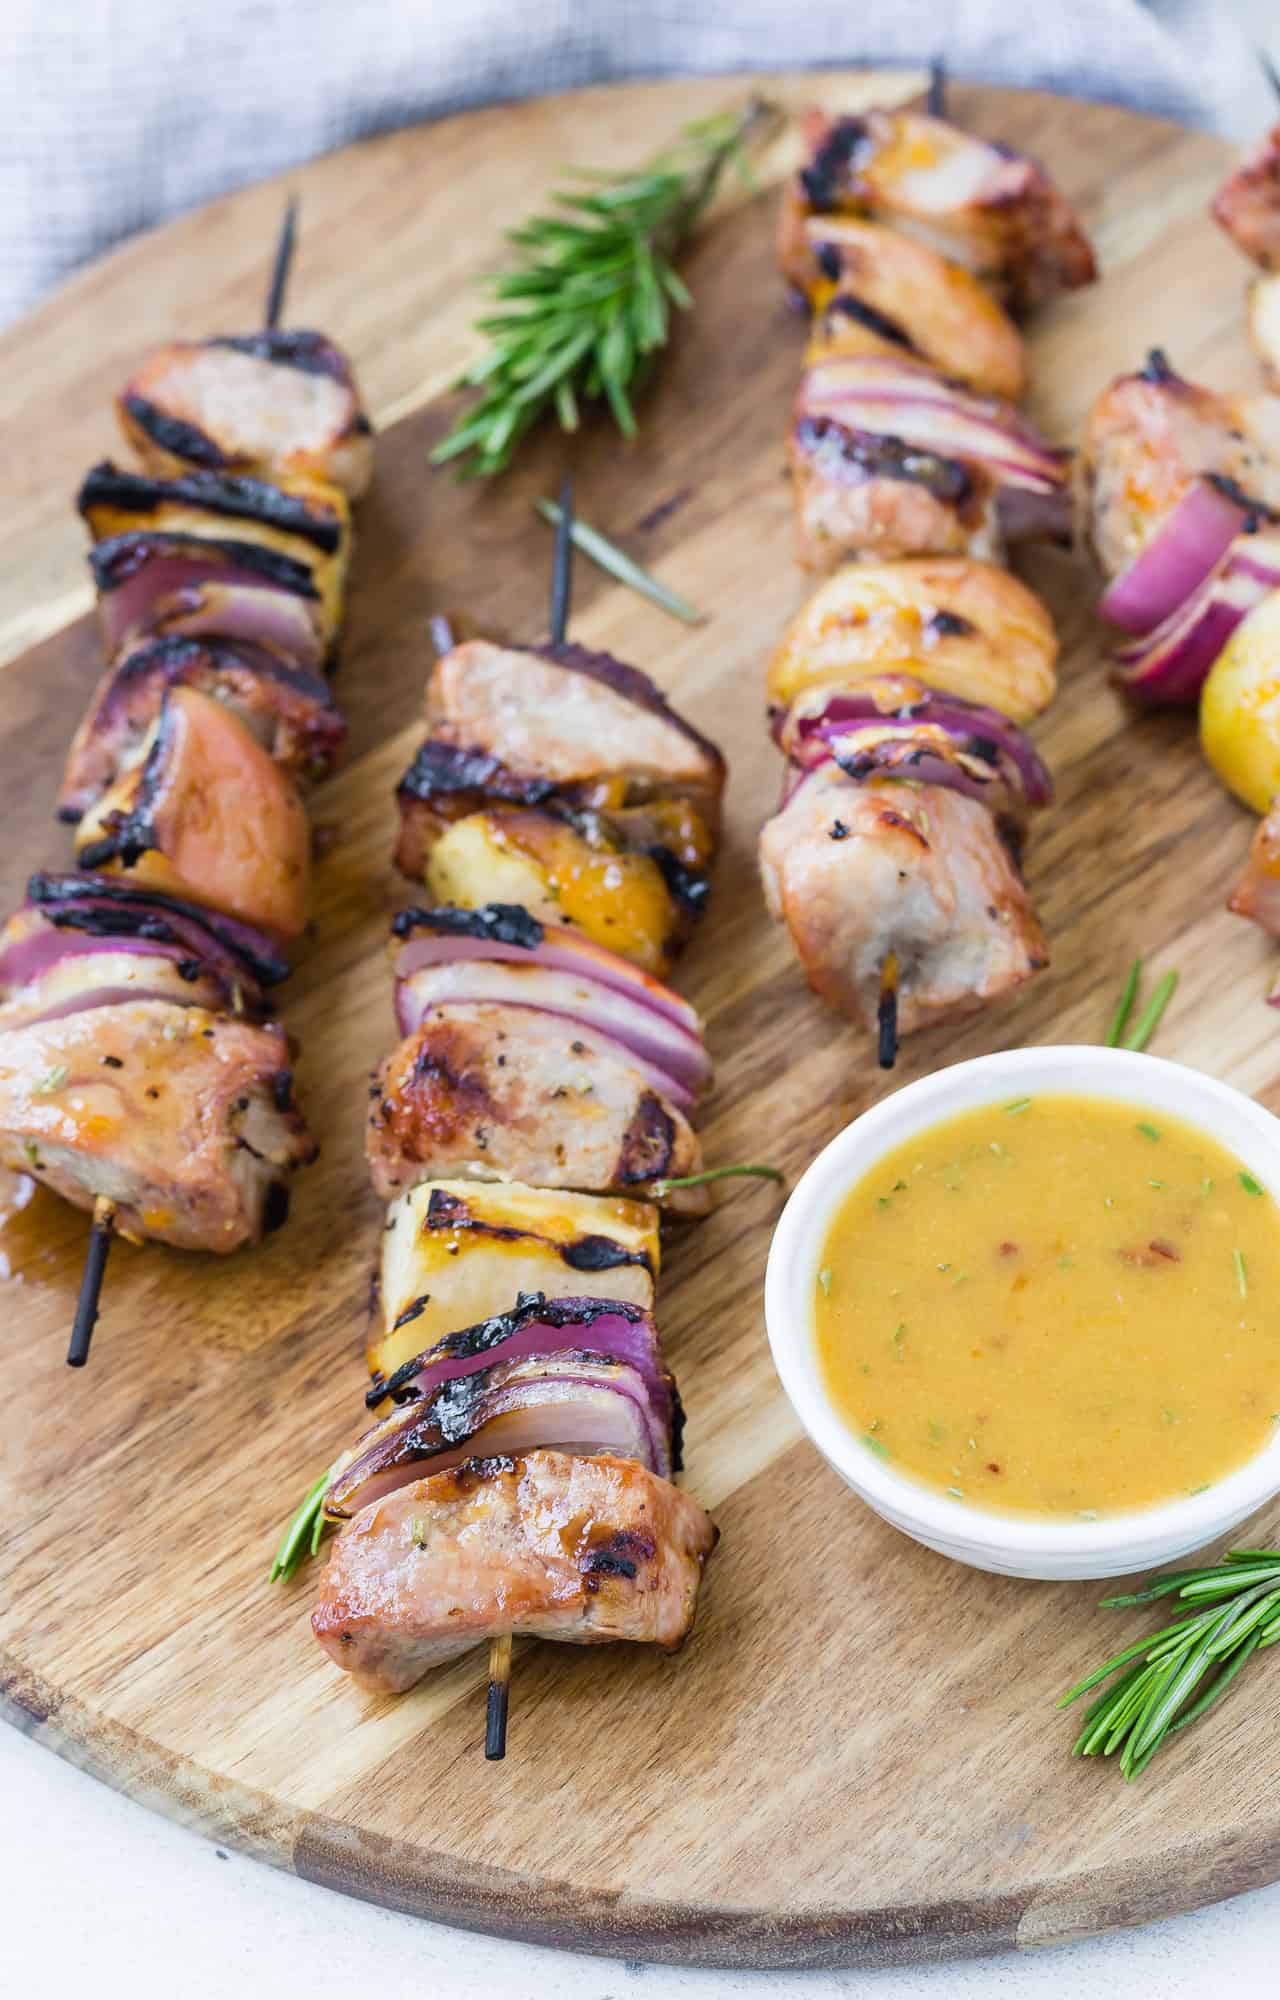 Pork kebobs on a wooden board with sauce.